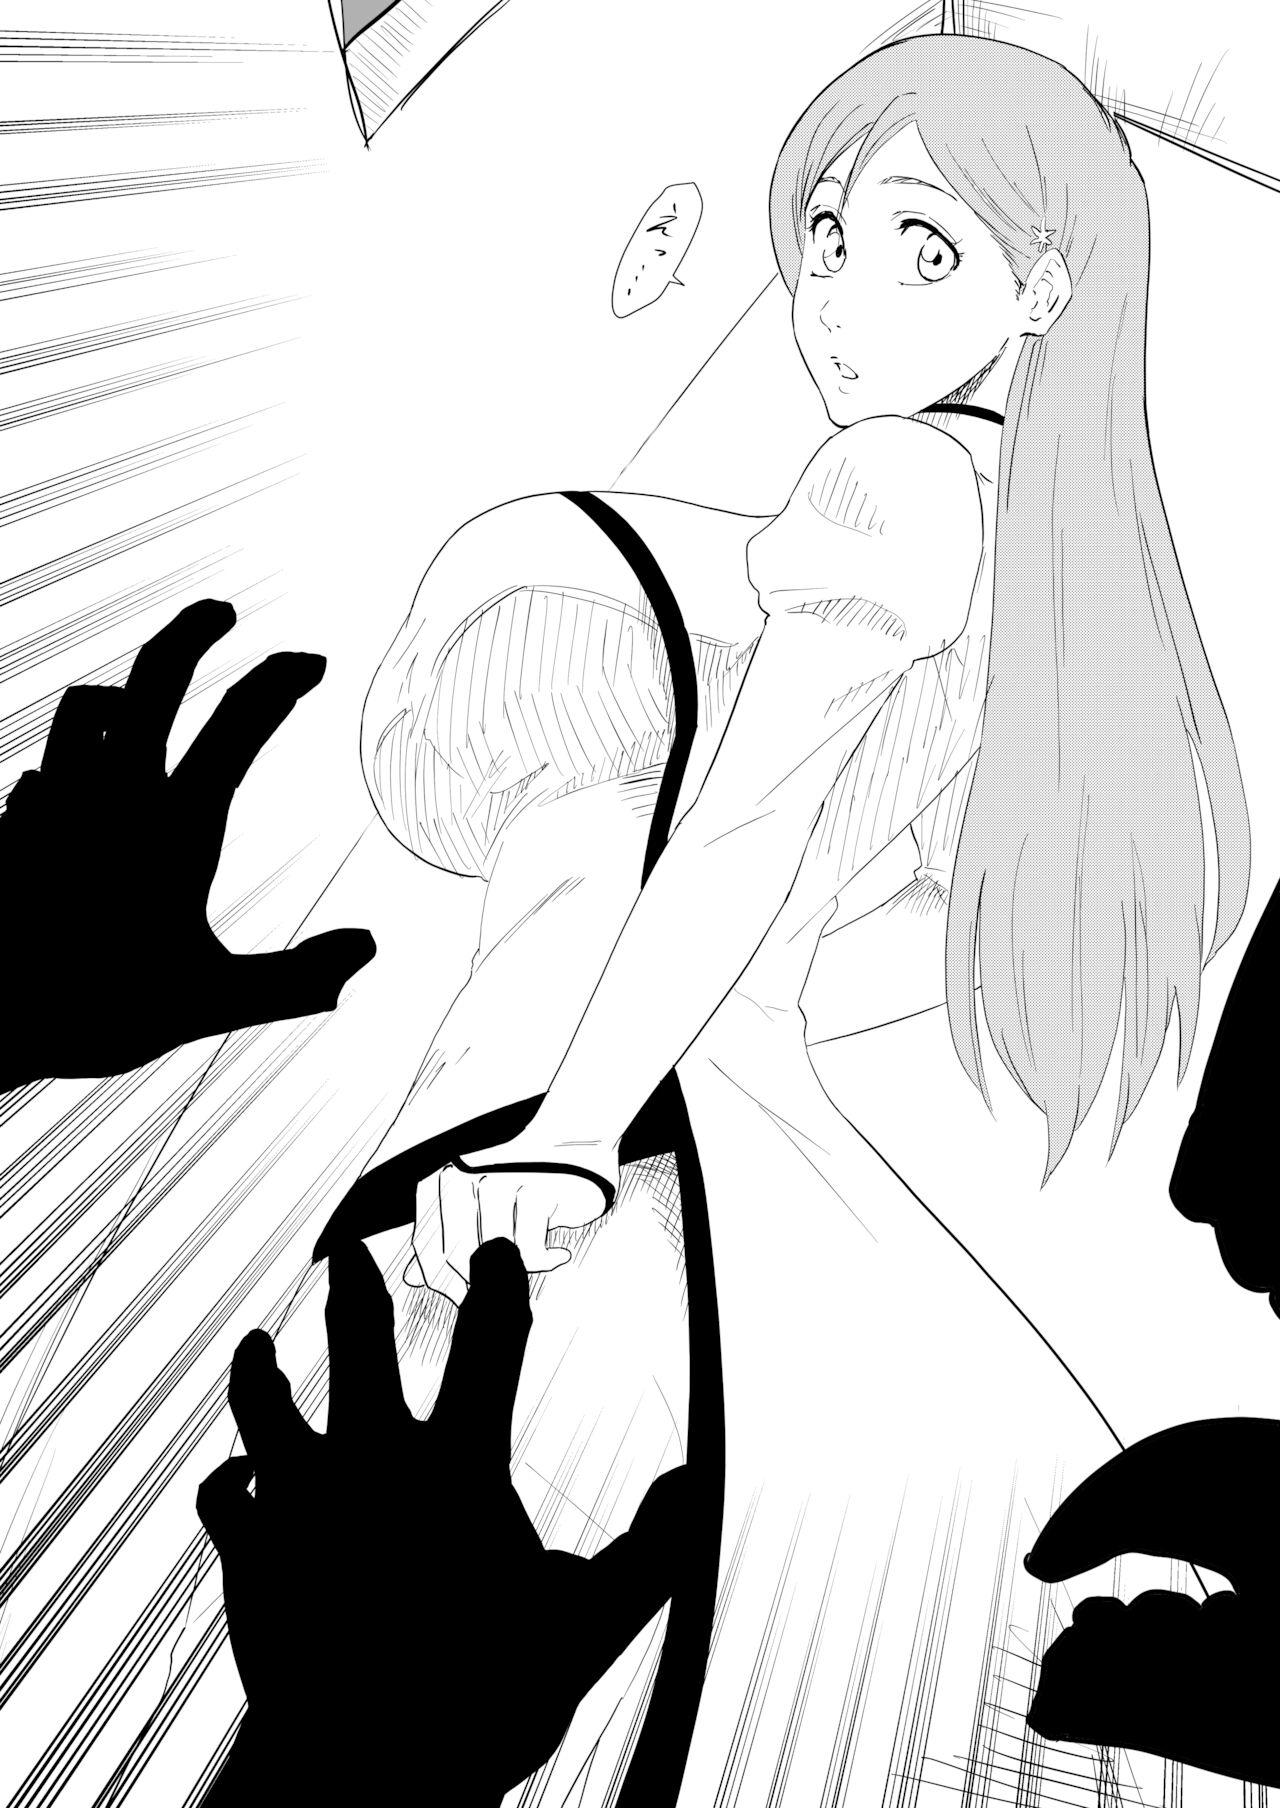 Club Orihime is attacked by goblin-like hollows - Bleach Fake Tits - Page 3